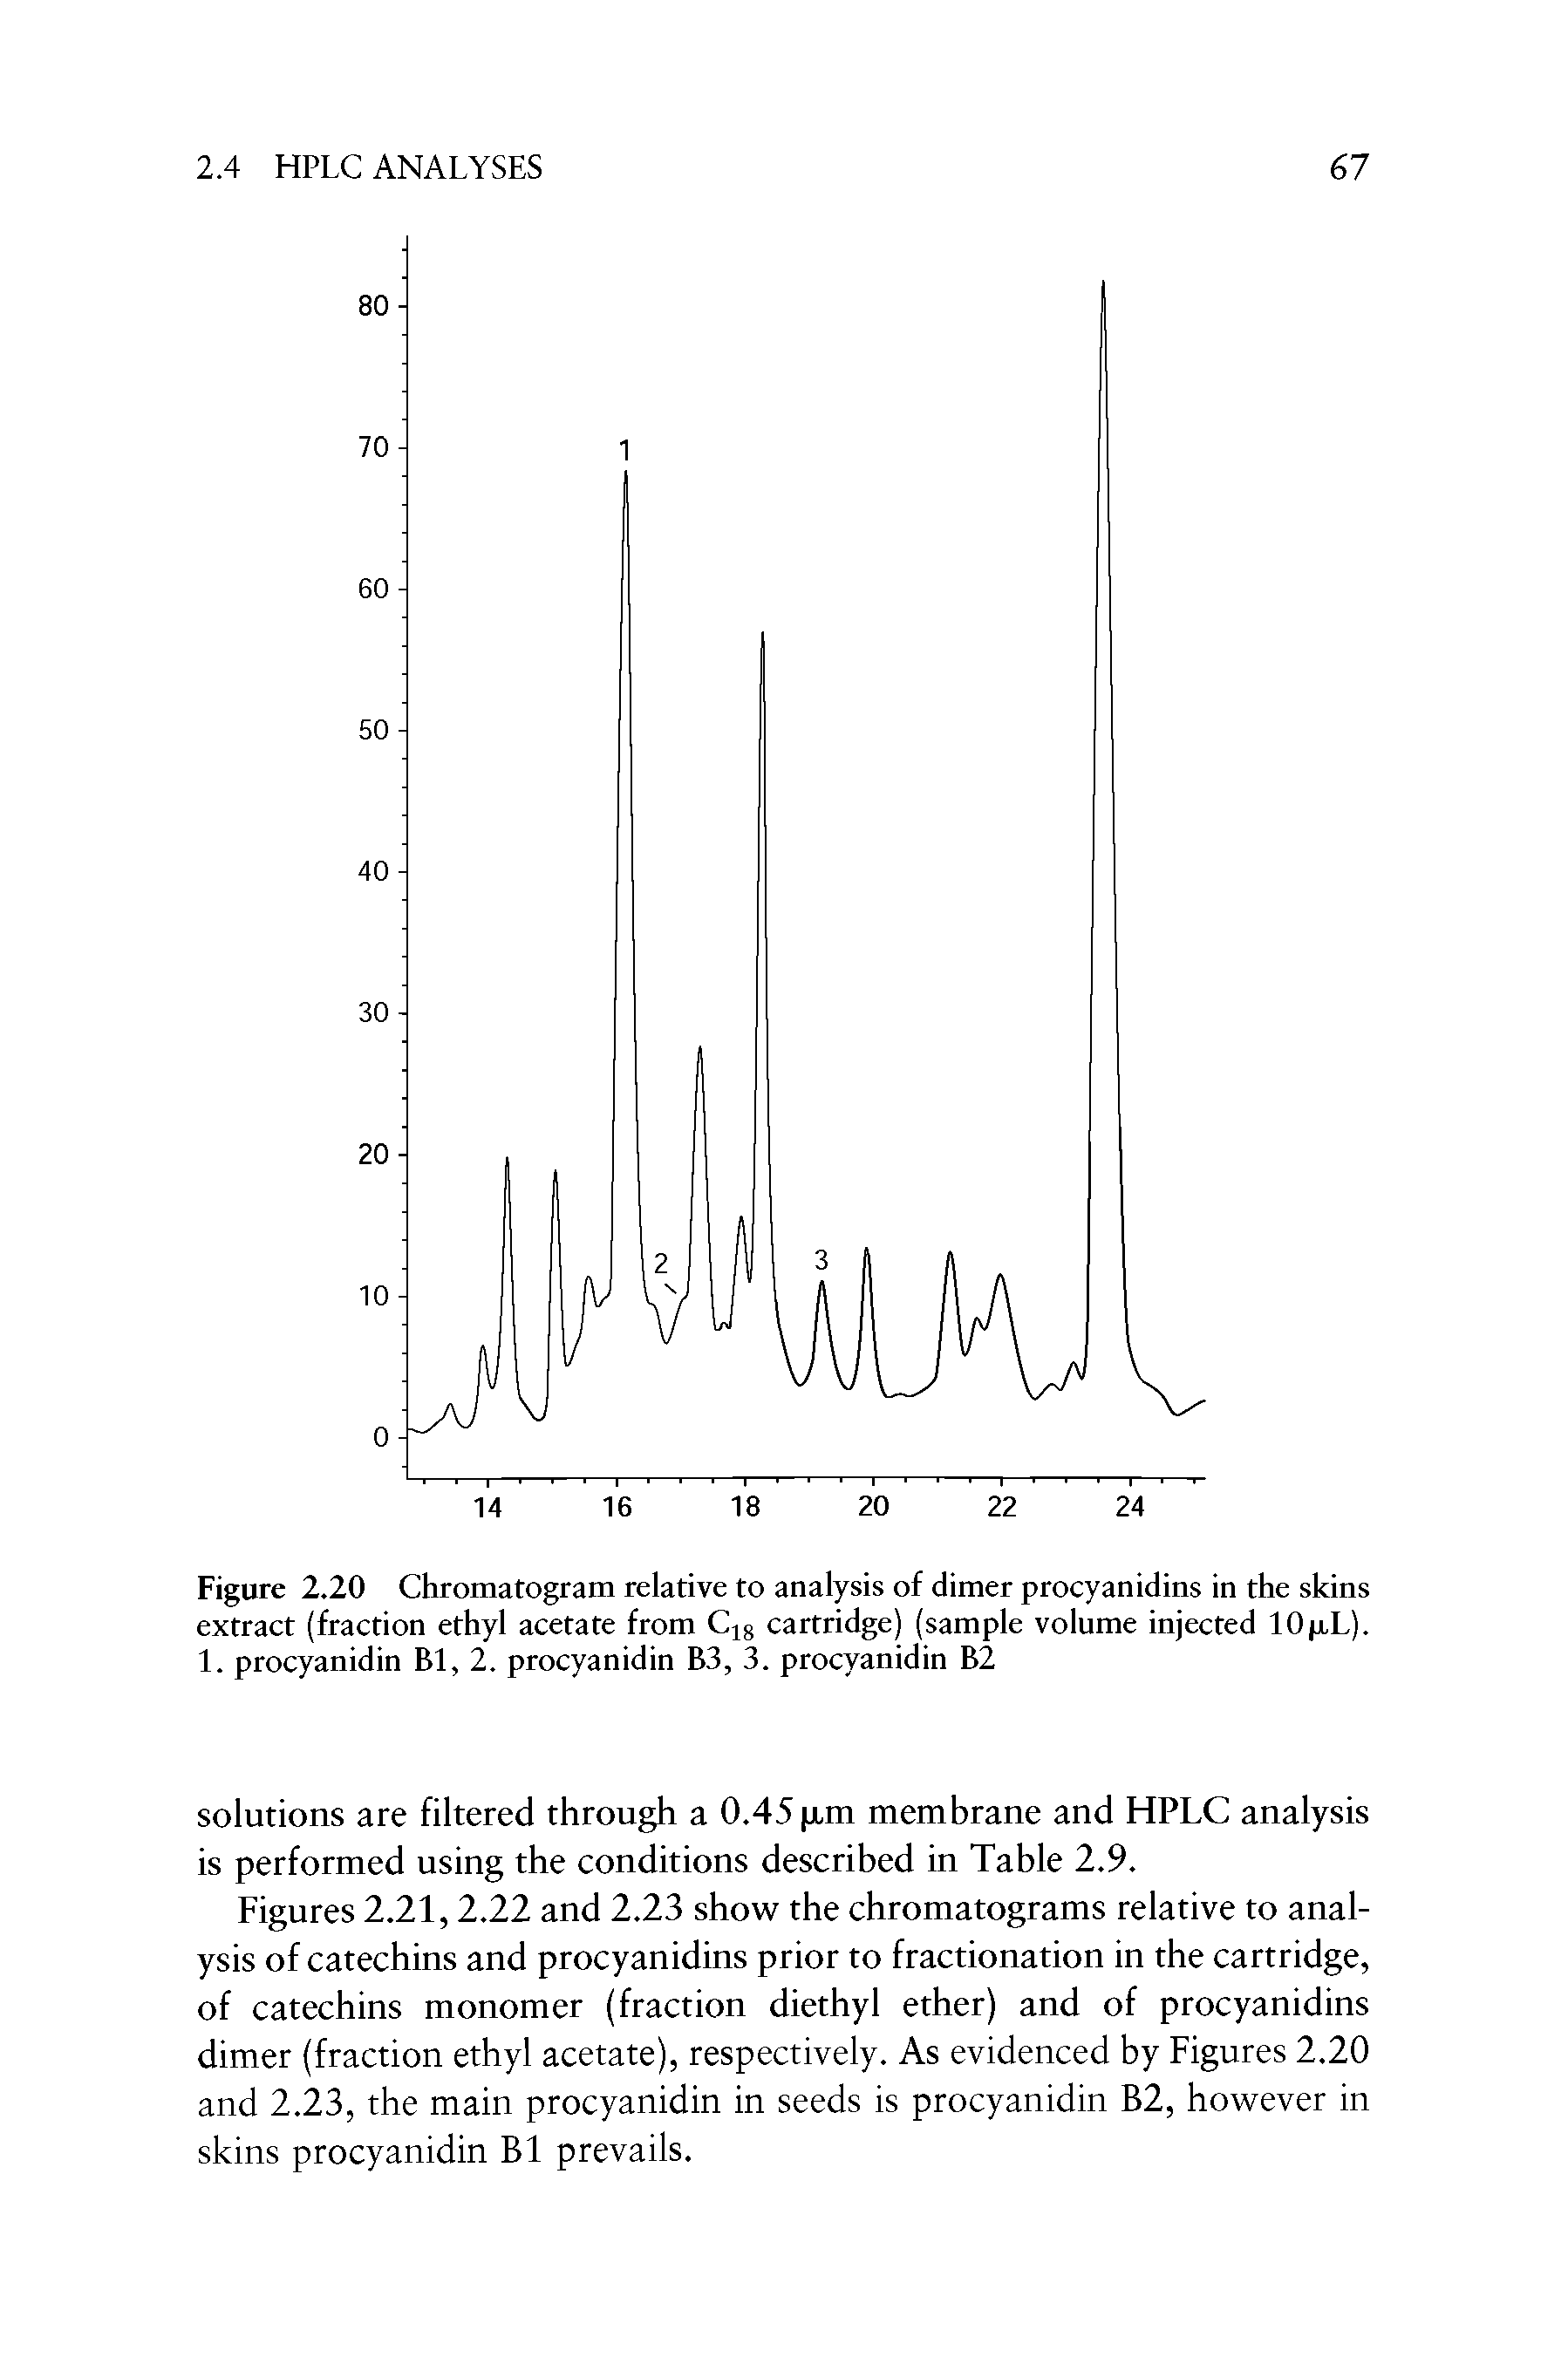 Figure 2.20 Chromatogram relative to analysis of dimer procyanidins in the skins extract (fraction ethyl acetate from C18 cartridge) (sample volume injected 10p,L). 1. procyanidin Bl, 2. procyanidin B3, 3. procyanidin B2...